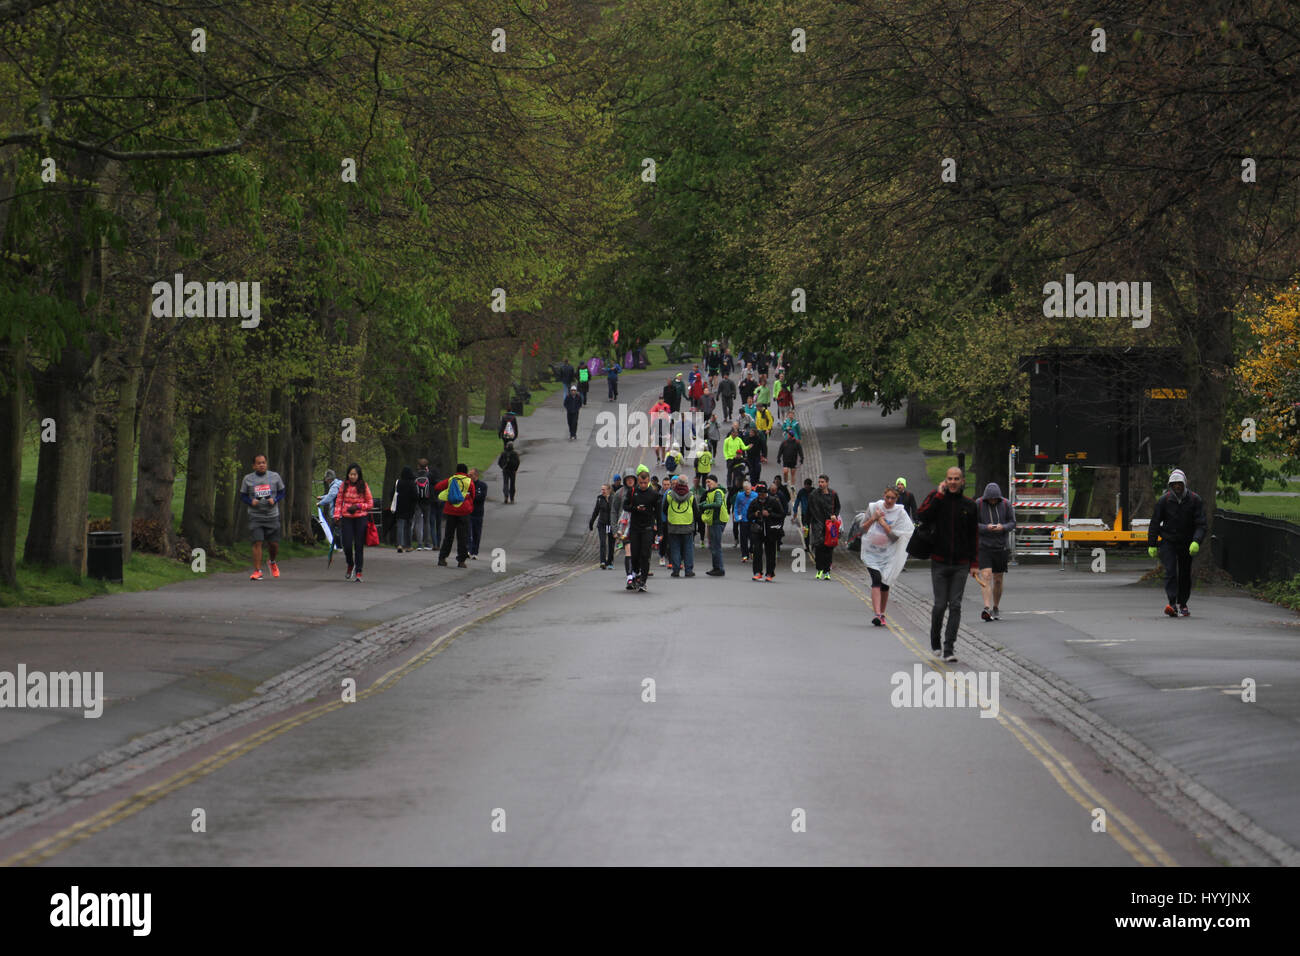 London, UK 24 April 2016. Runners prepare for the annual Virgin Money London Marathon at Blackheath on 24th April 2016. Three quarters of all London Marathon competitors run for a charity, the NSPCC being the Official charity of the 2016 marathon.Approximately 38,000 runners ​are expected to start the run, with the London Marathon’s one millionth finisher crosing the line during this years race, a milestone in the history of the race that started in 1981. © David Mbiyu/Alamy Live News Stock Photo